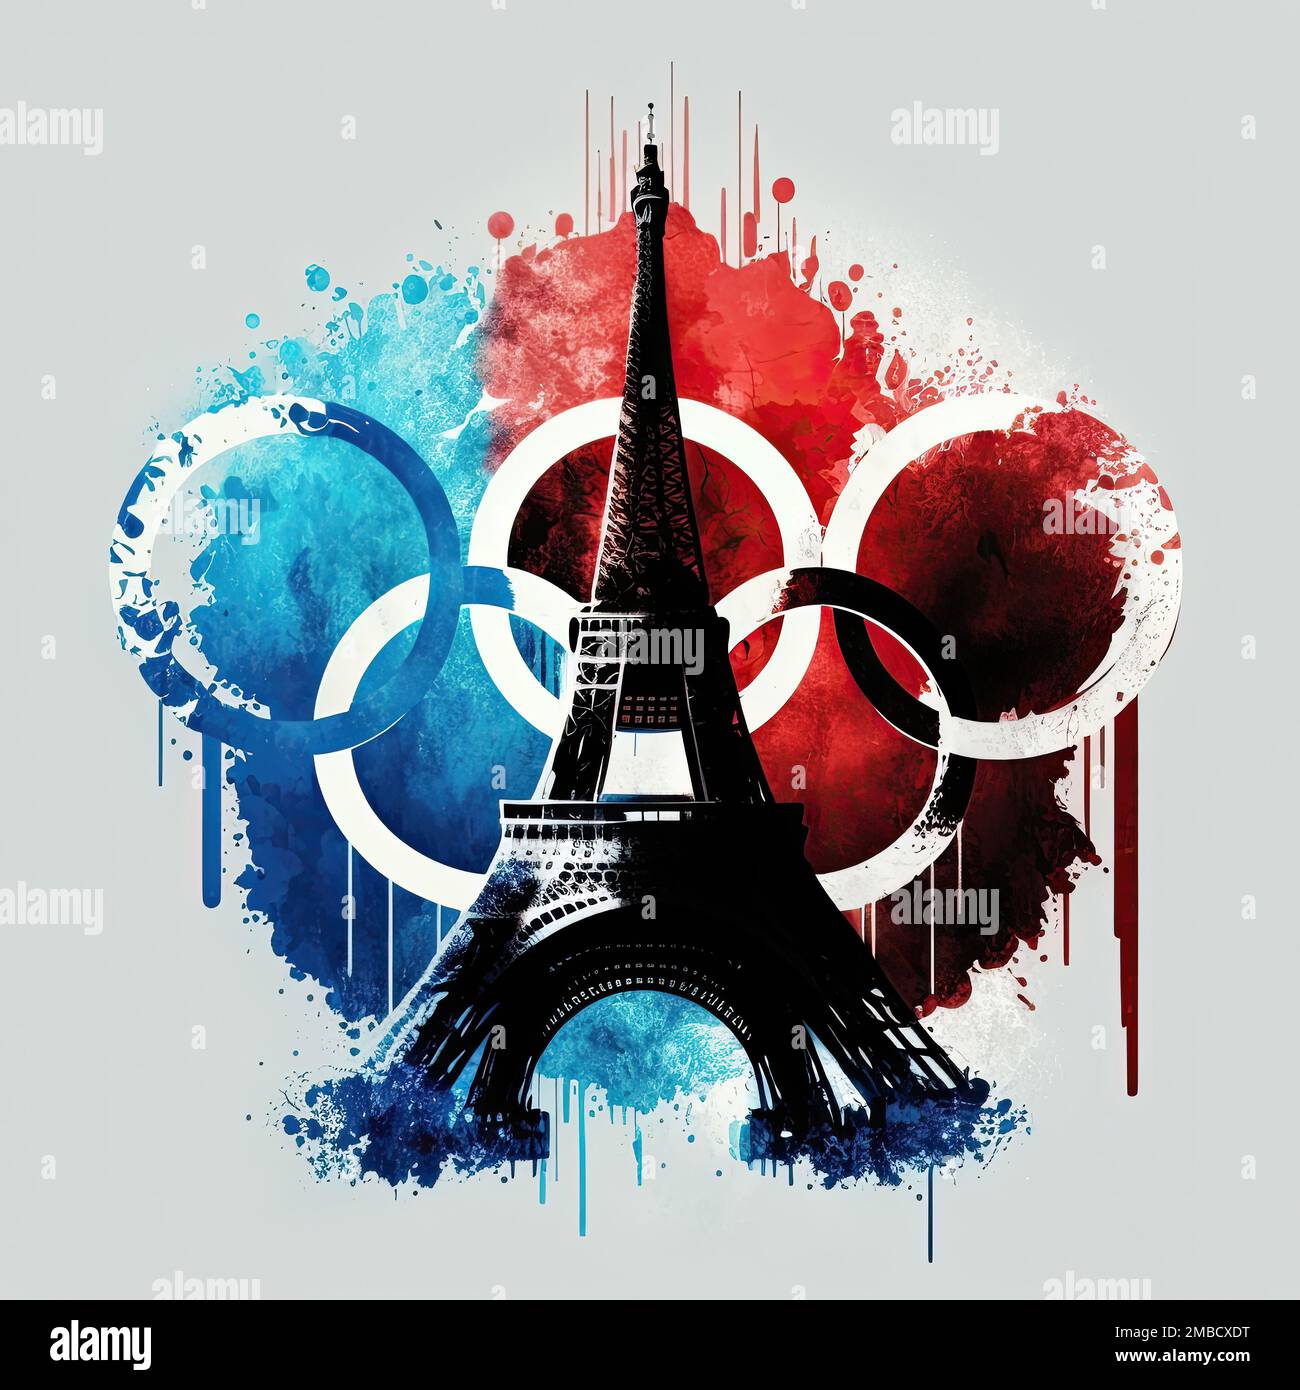 Unleashing Excellence The Paris 2024 Olympic Games" The Paris 2024